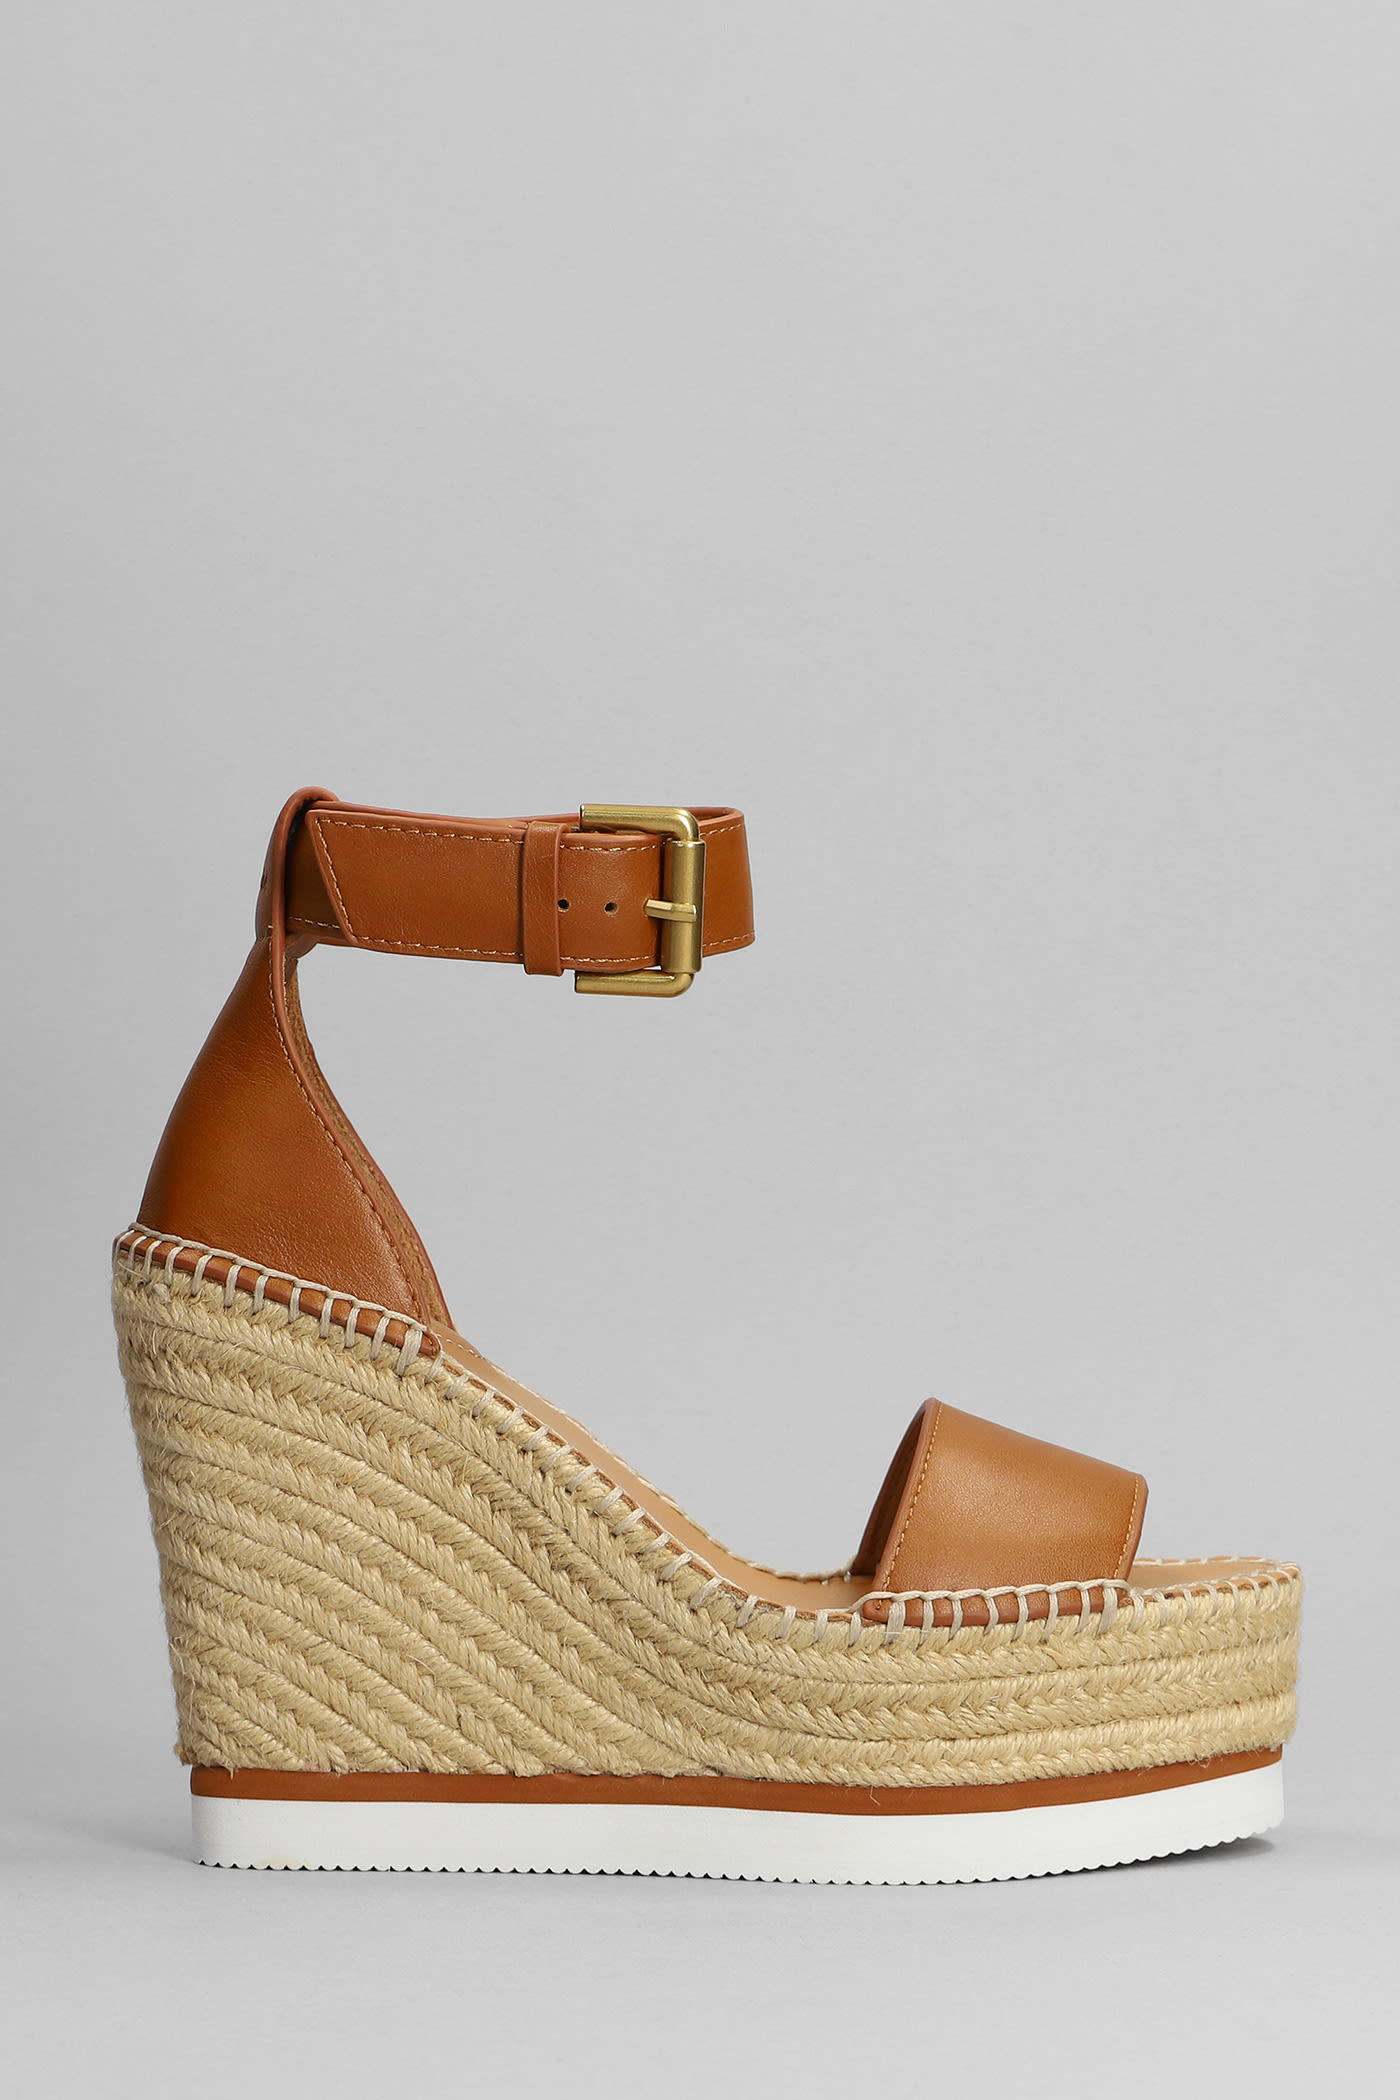 SEE BY CHLOÉ GLYN WEDGES IN LEATHER colour LEATHER